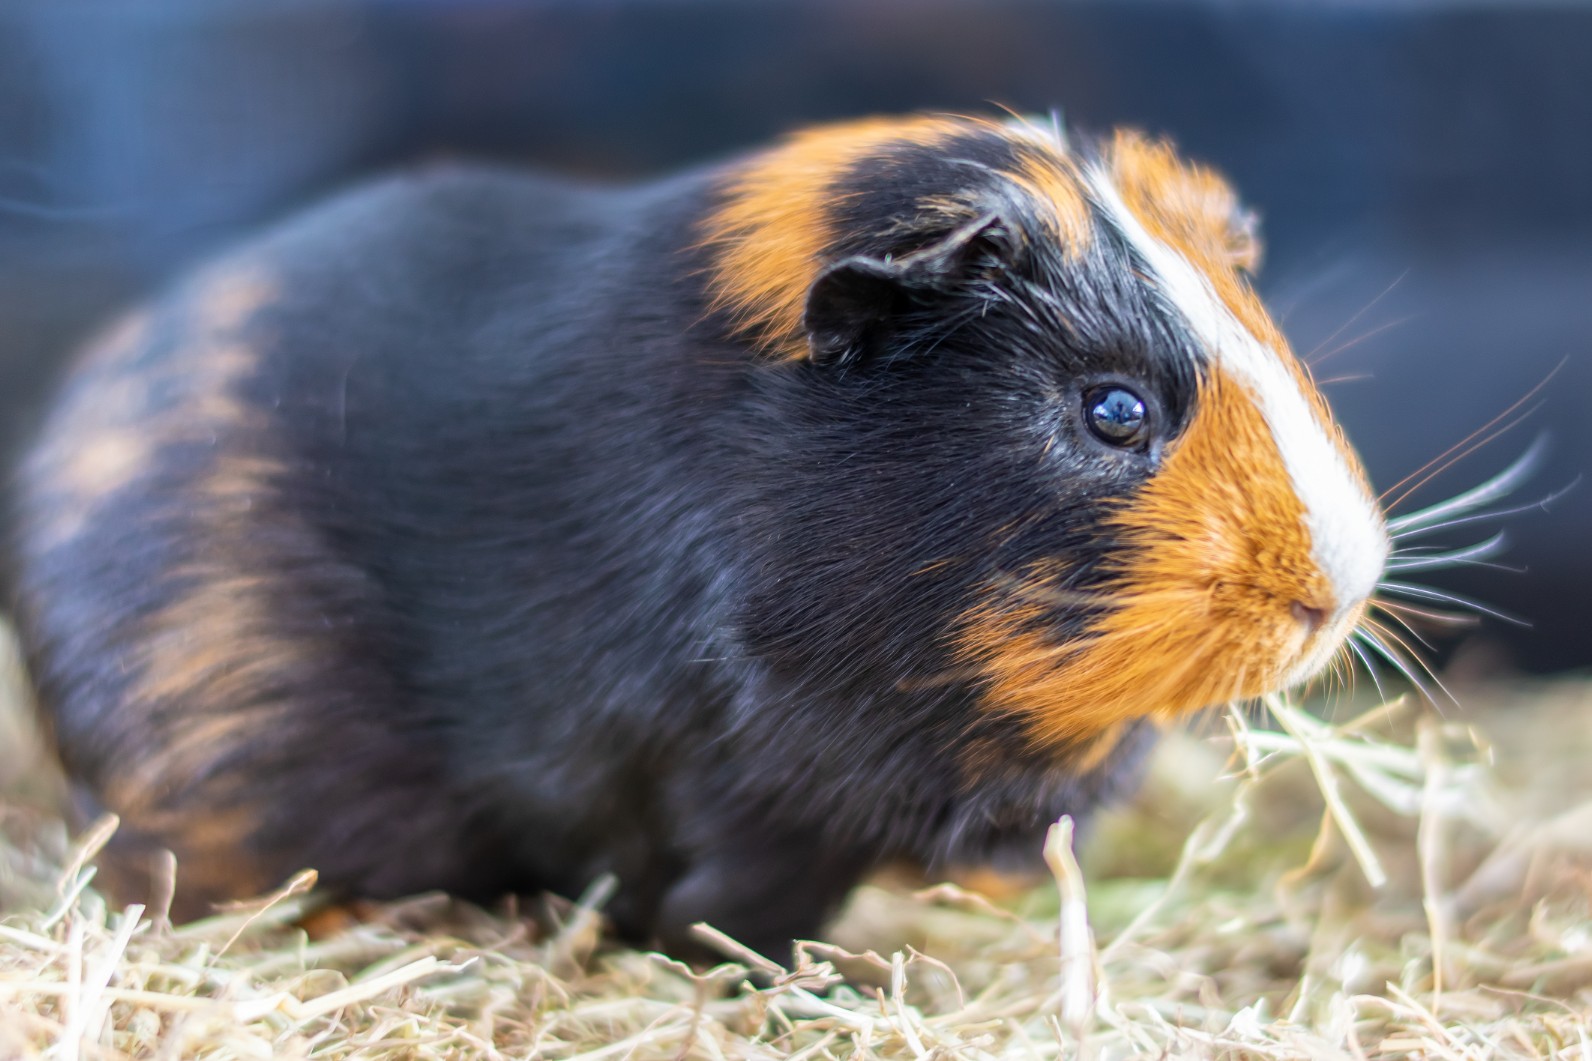 So Just What Is The Difference Between A Guinea Pig Vs Hamster